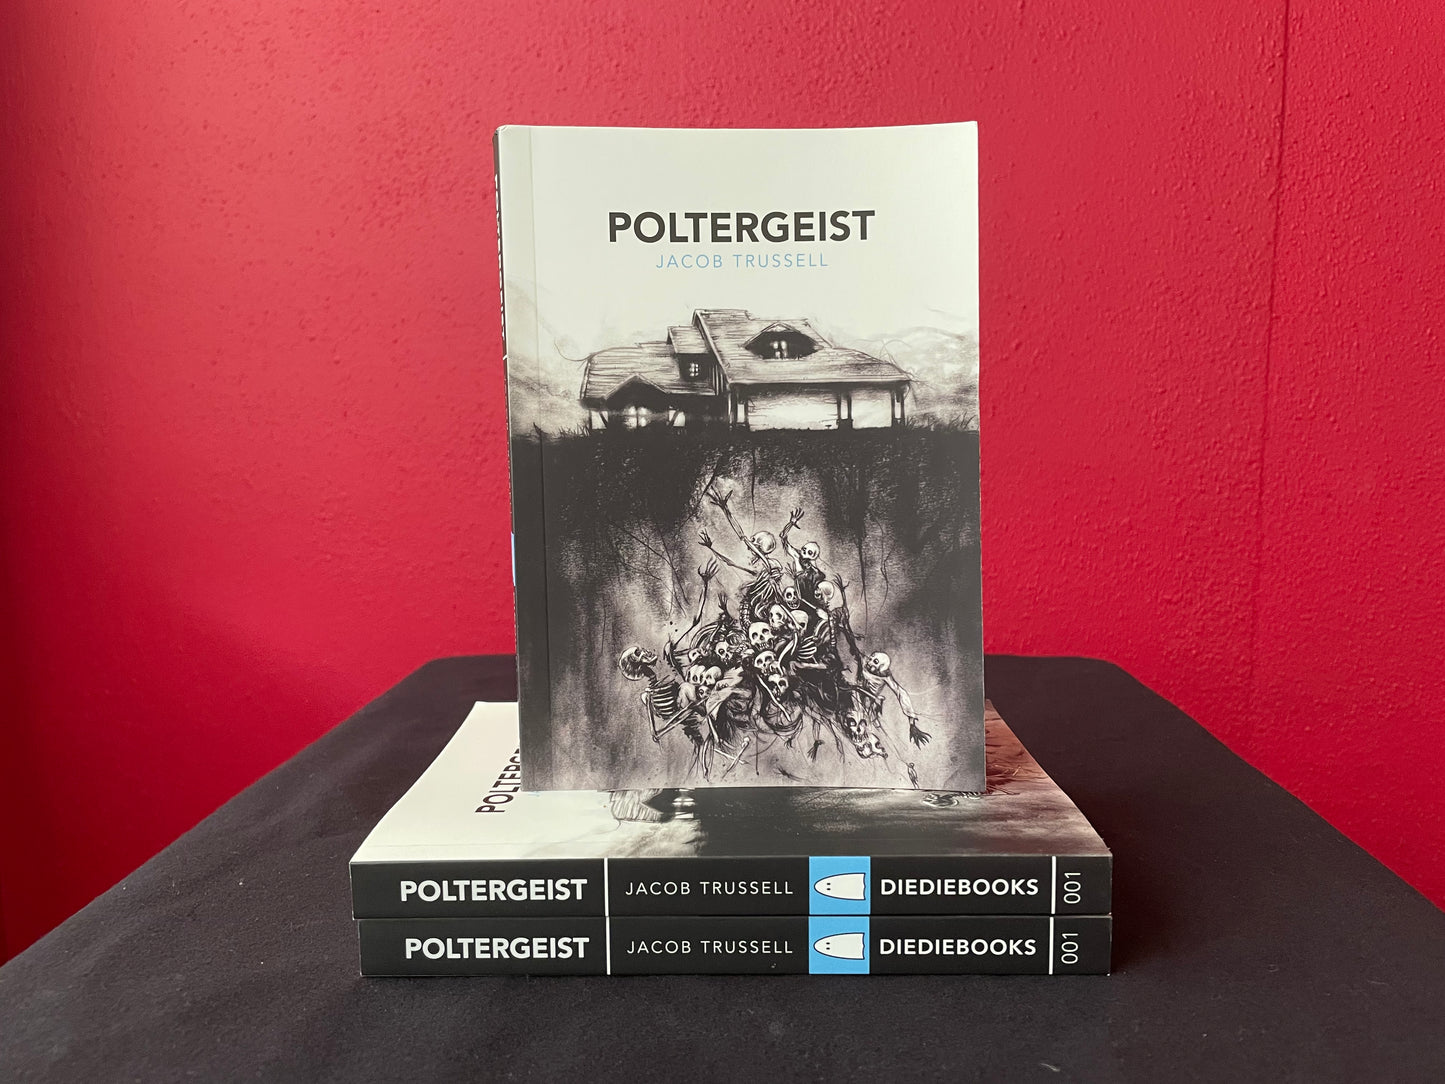 Image of Poltergeist book by Jacob Trussell atop a stack of two other copies